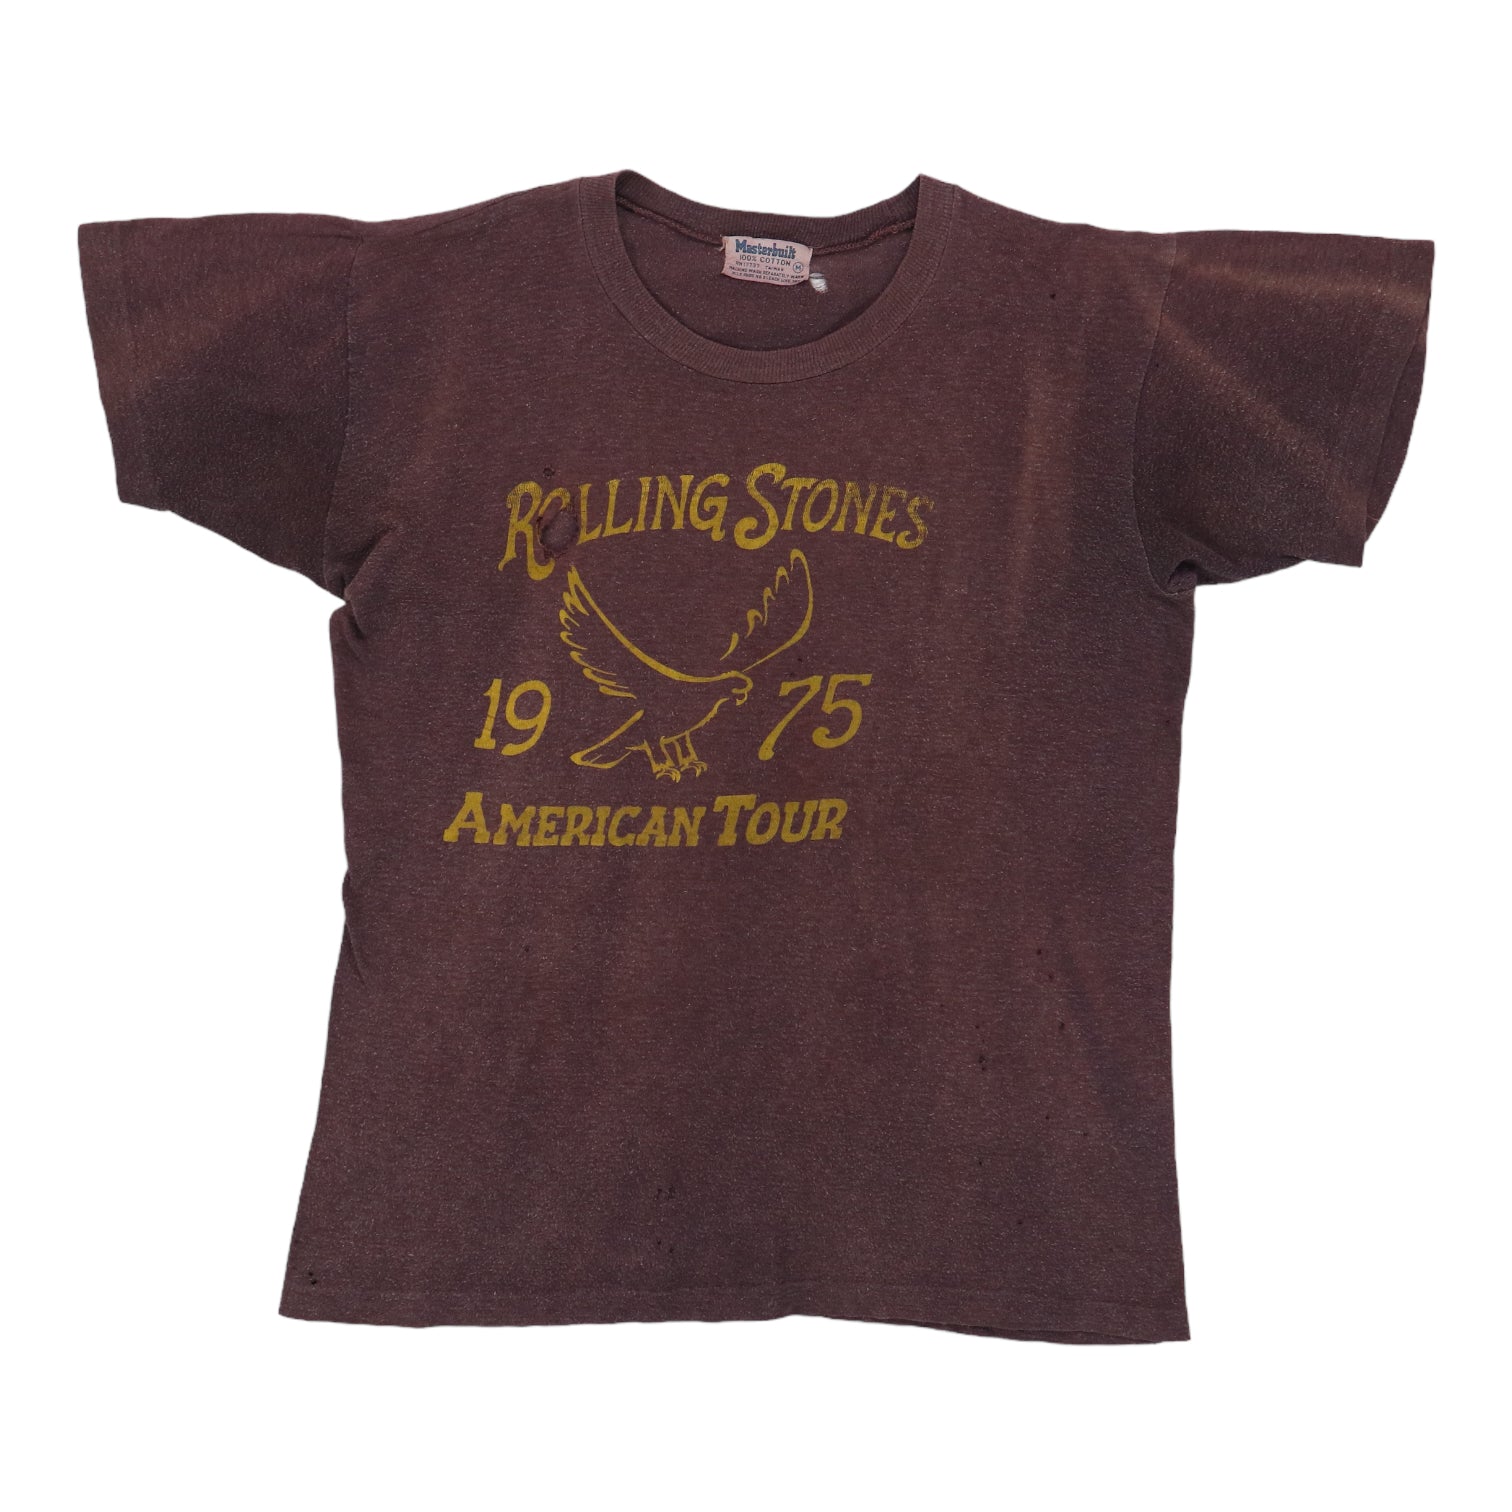 1975 Rolling Stones Tour Of The Americas Shirt – WyCo Vintage